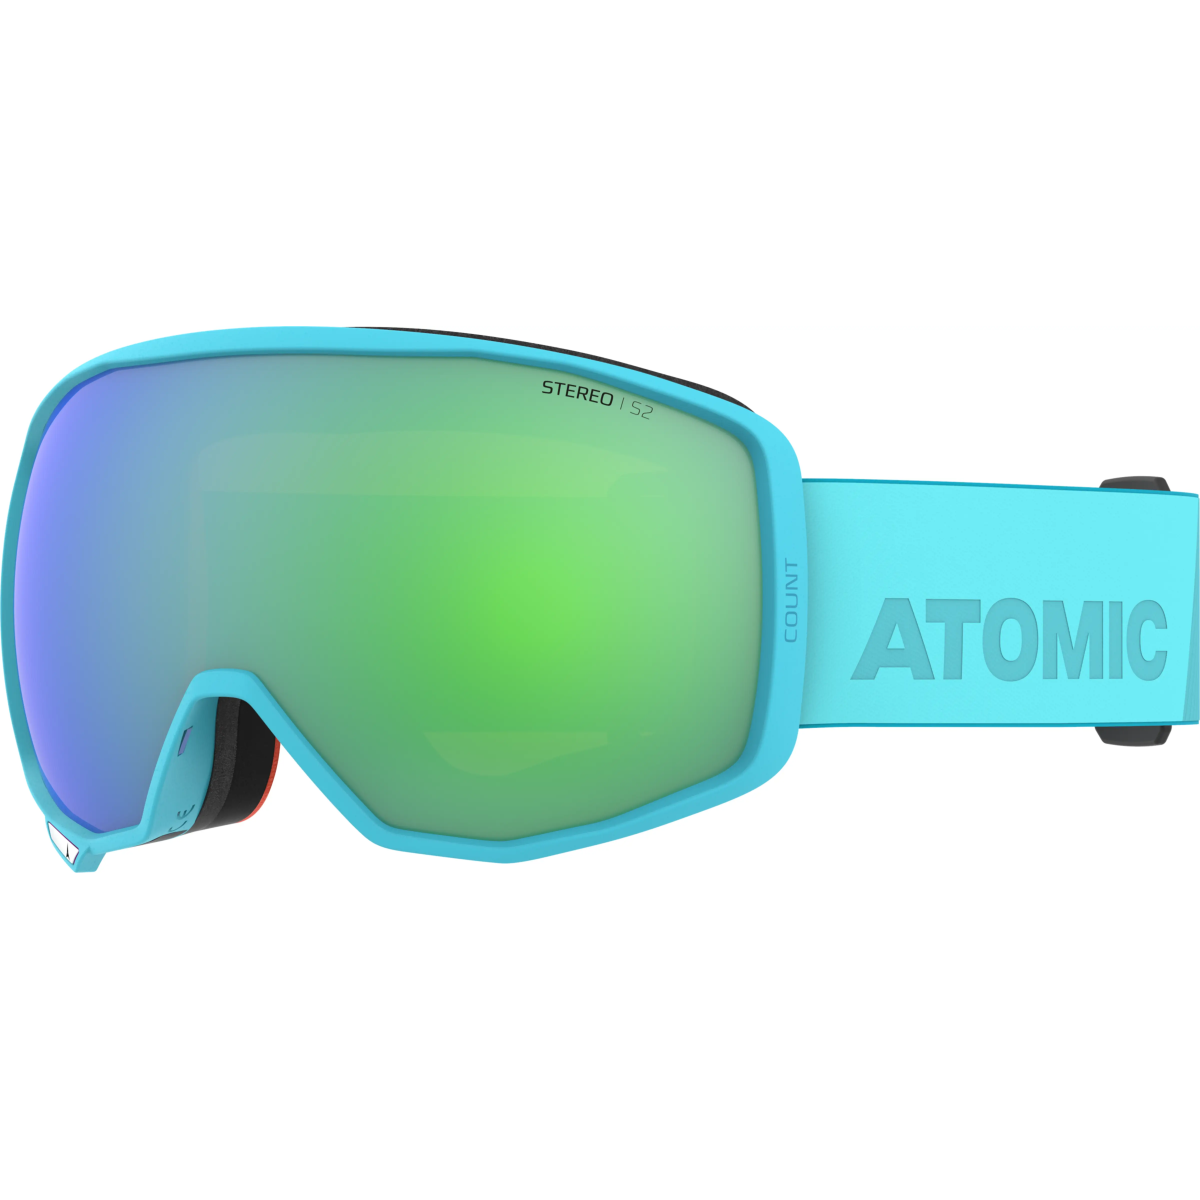 ATOMIC COUNT STEREO SCUBA BLUE W/GREEN ST C2 brilles